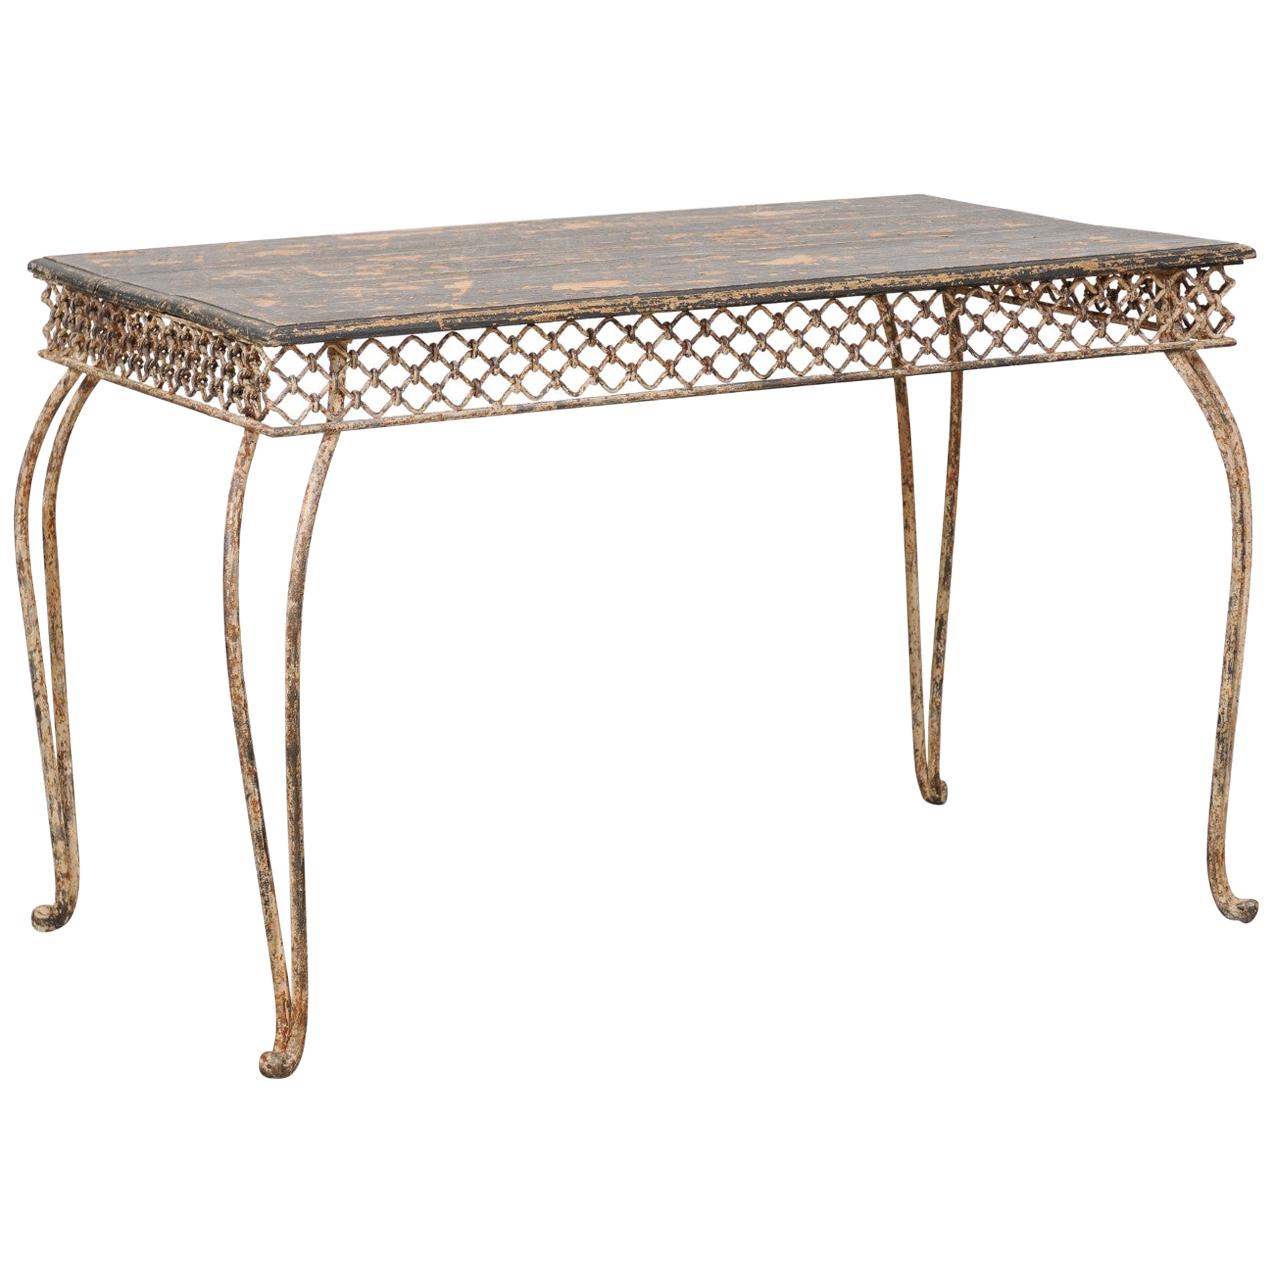 Late 19th Century Iron and Wood Garden Table